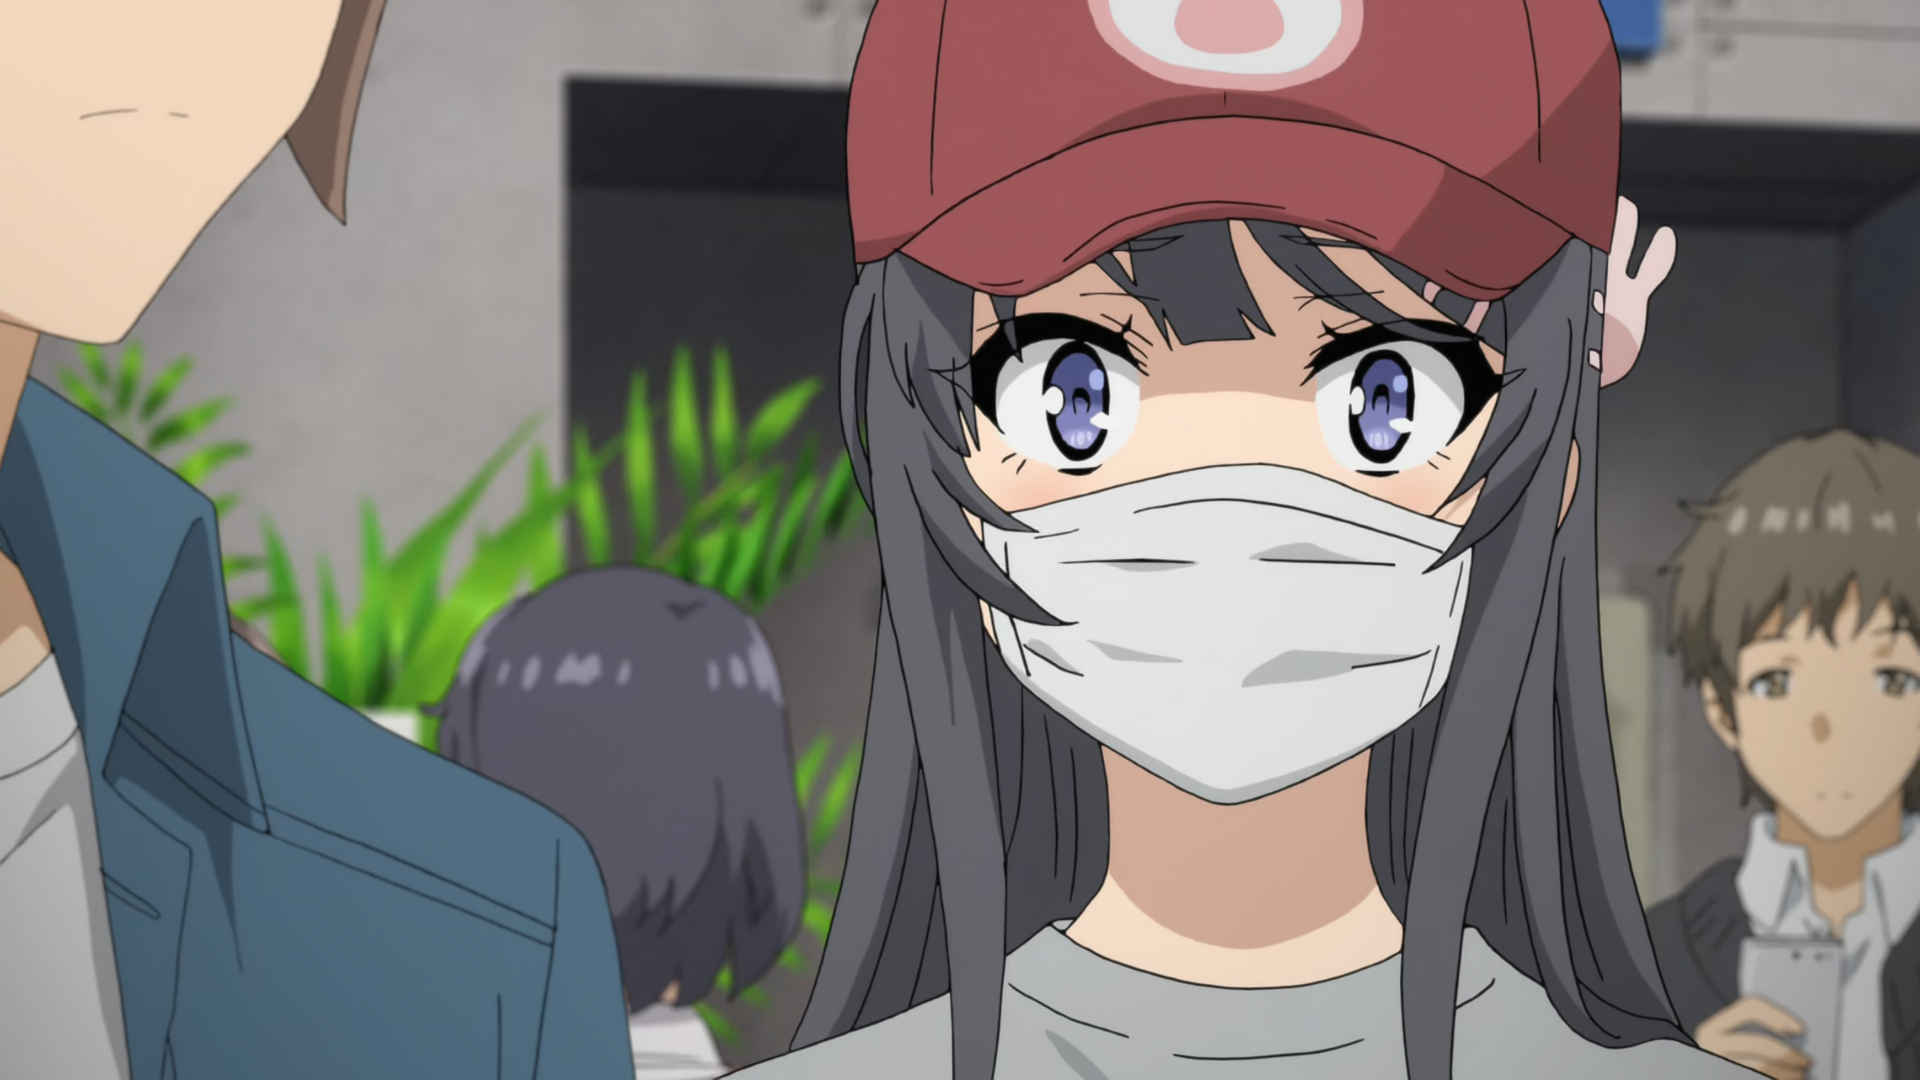 Crunchyroll - FEATURE: Unmasked! Rating the Best and Worst Masks in Anime